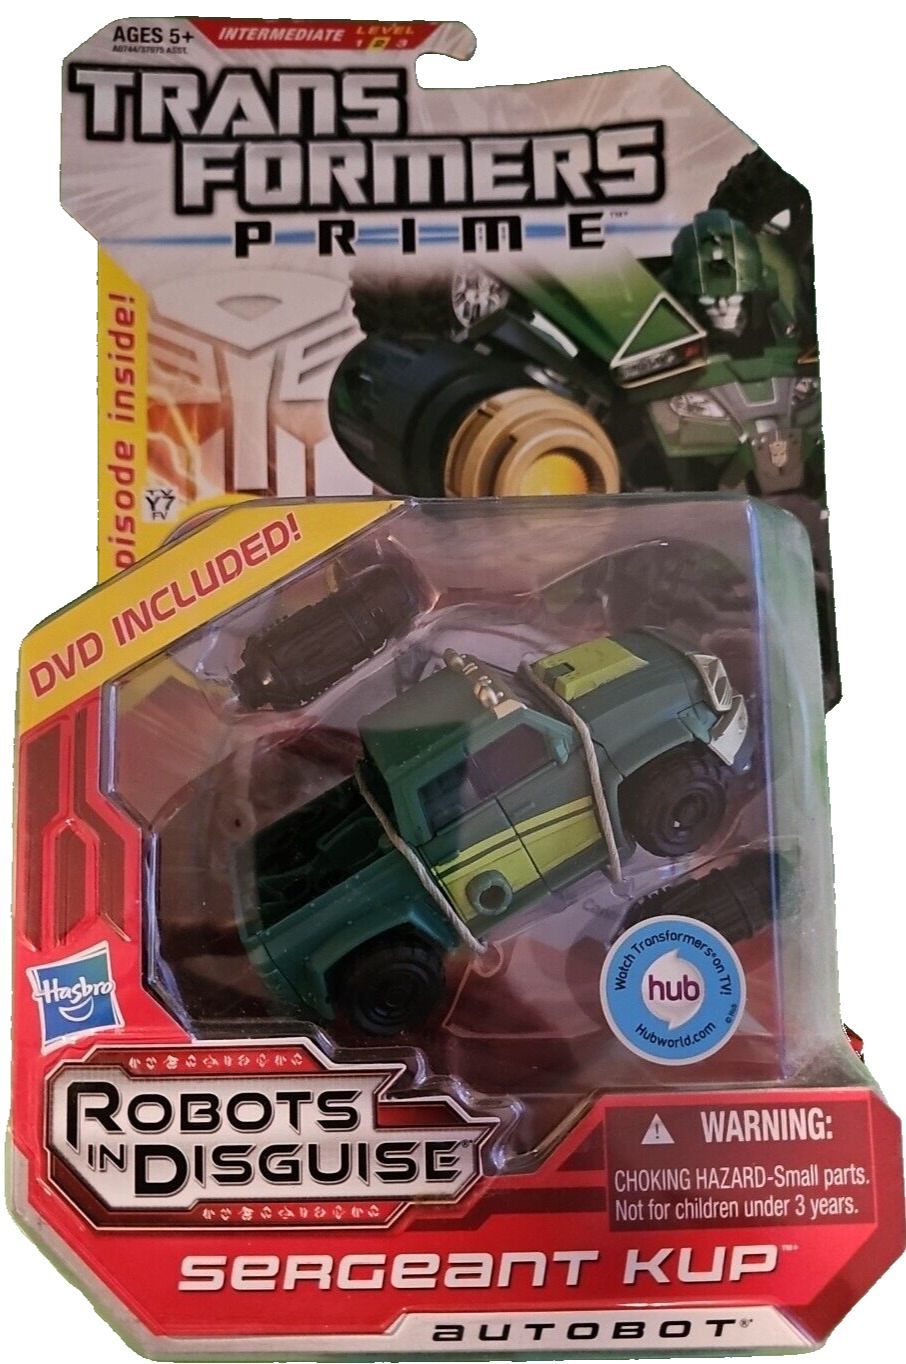 Transformers Prime RID Deluxe Class Sergeant Kup Autobot Action Figure Hasbro S3